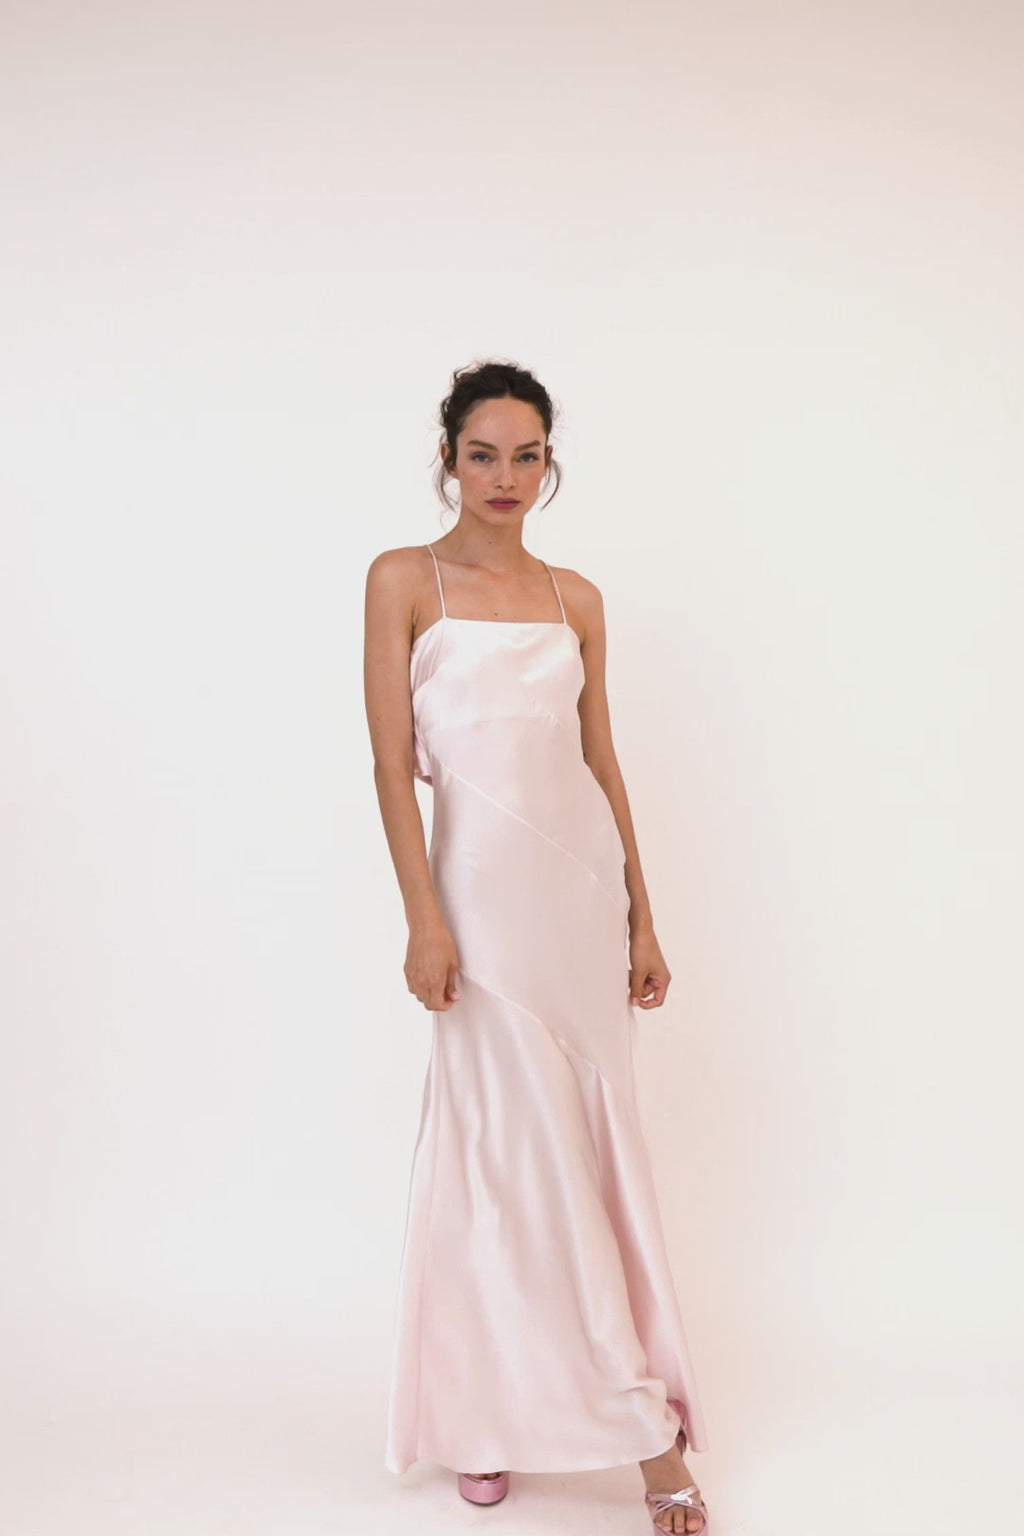  The Oaklynn Maxi Dress is 100% pink silk and features a sweeping silhouette, adjustable spaghetti straps, asymmetrical seams, and a scoop back with a large bow   OAKLYNNDRESS- MACCHIATO